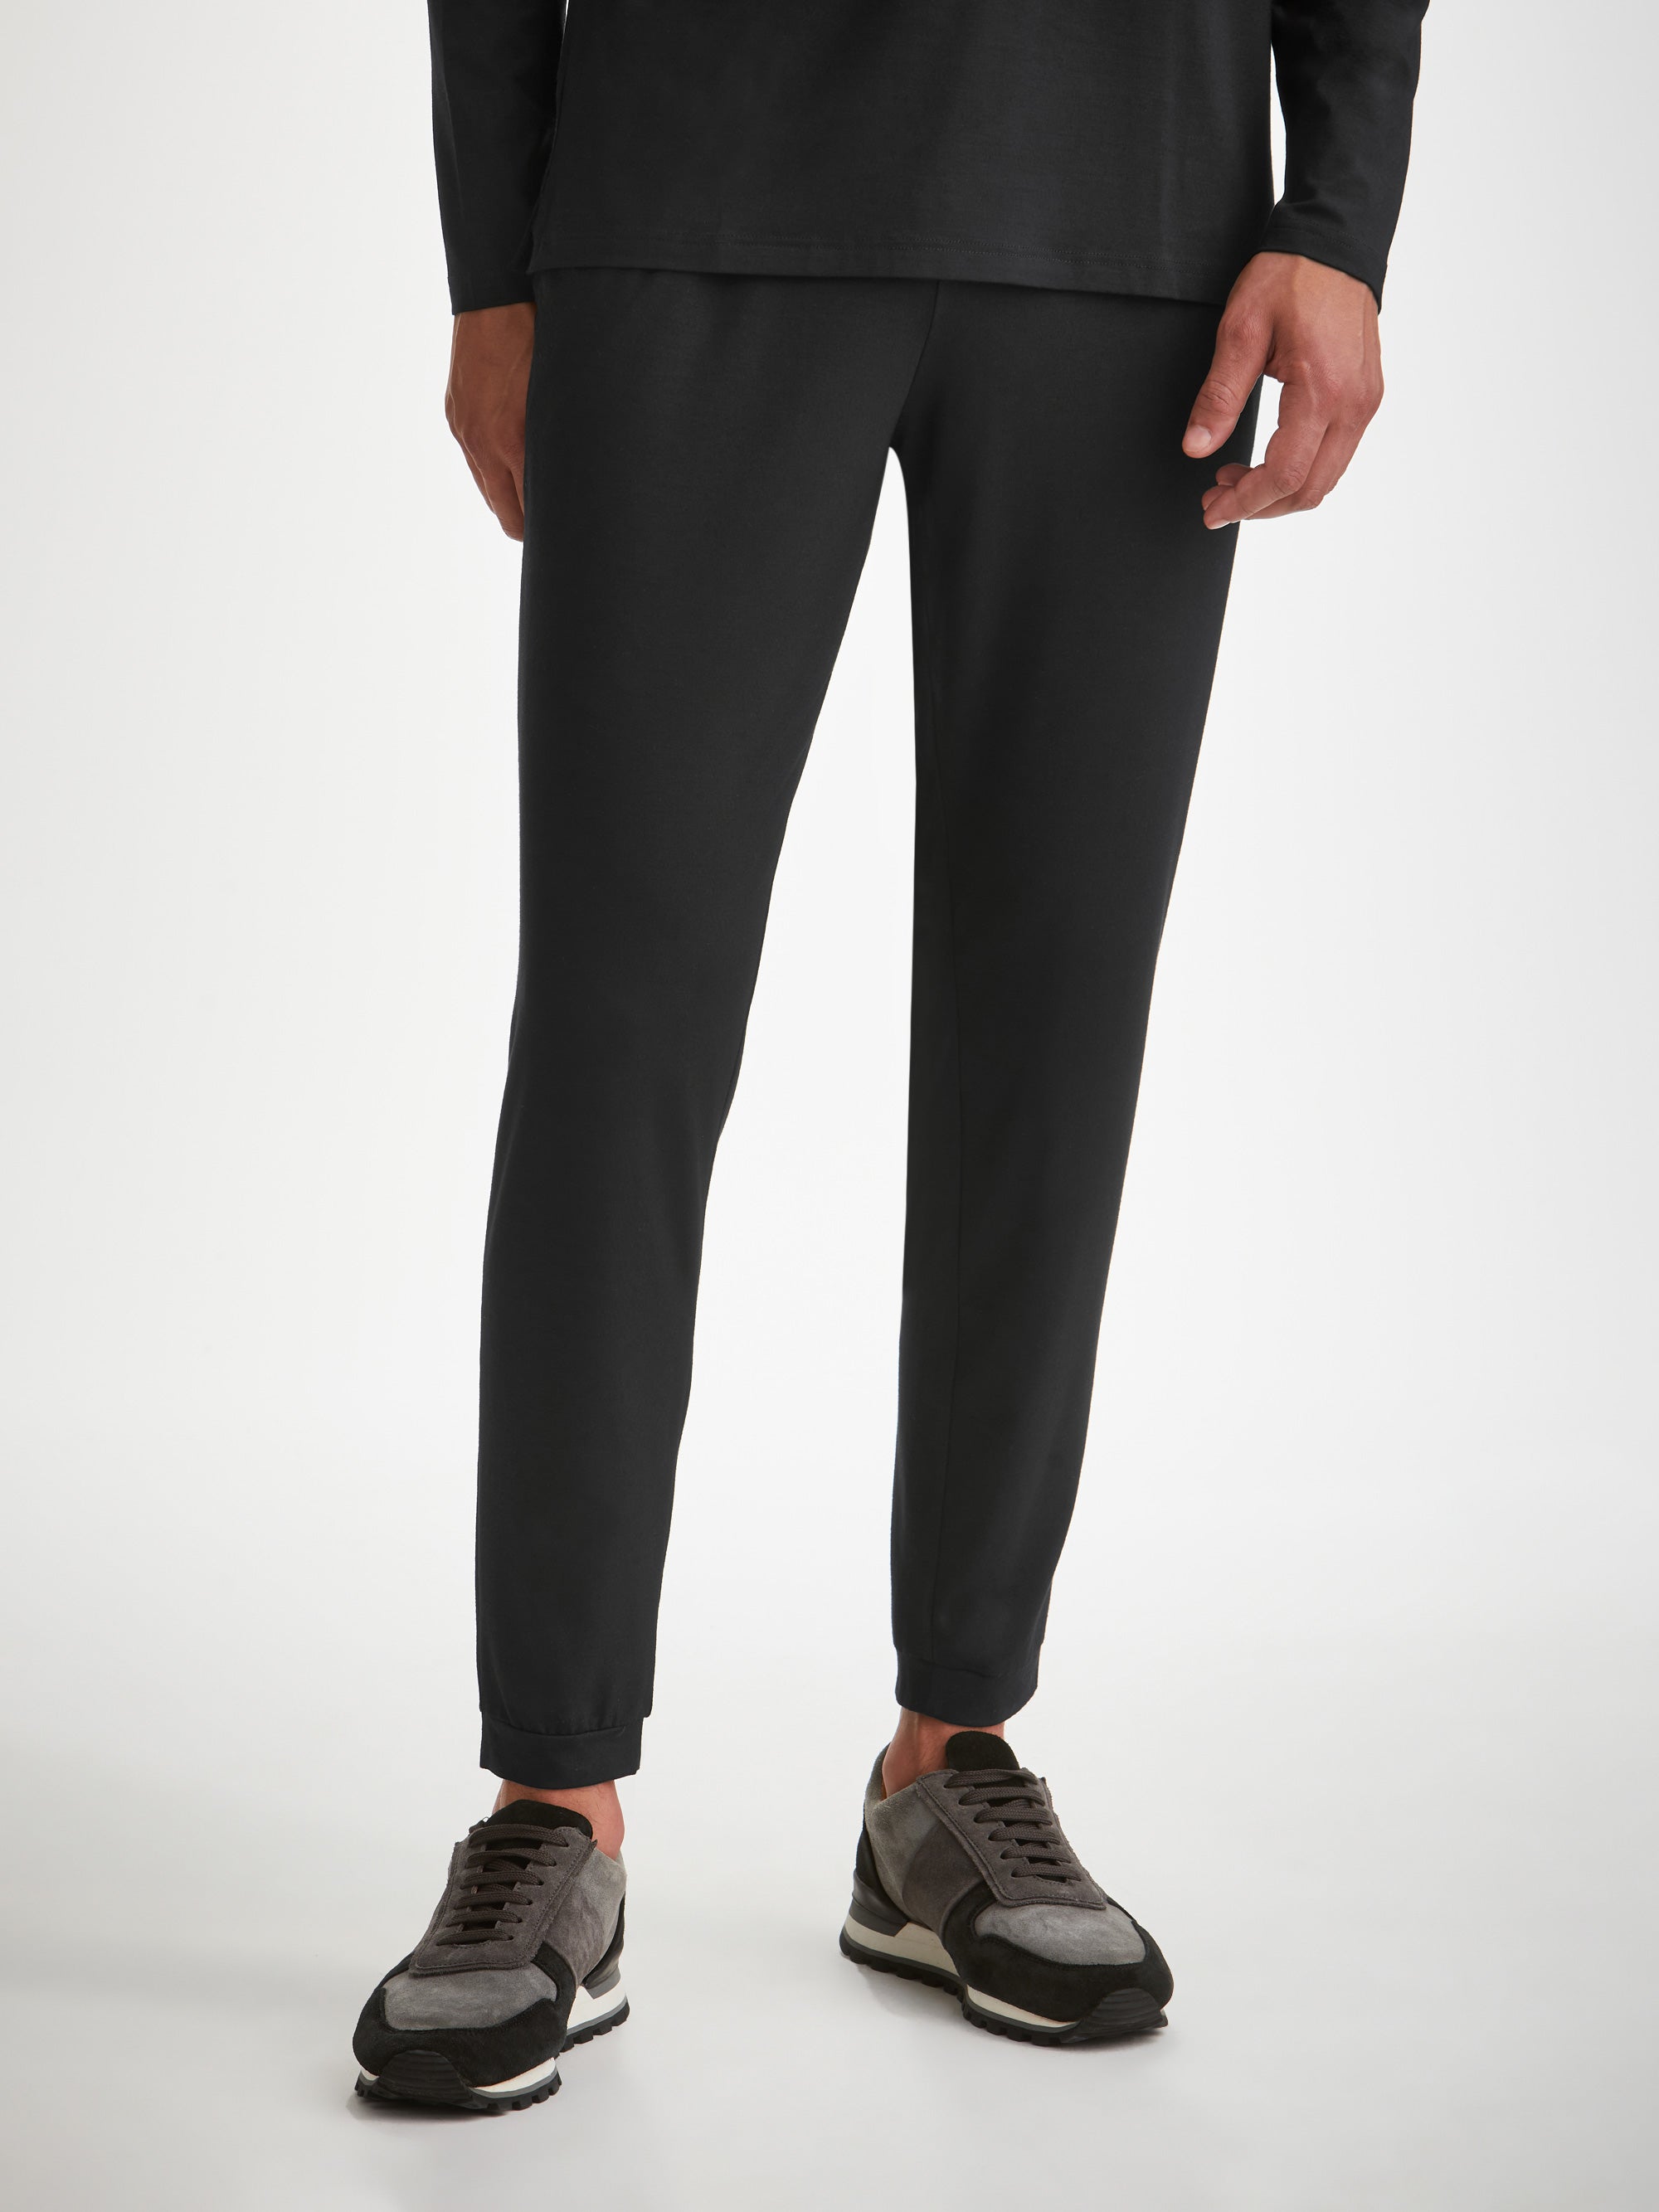 Organic Cotton Track Pants with Elastic Waist in Charcoal | Hallensteins NZ